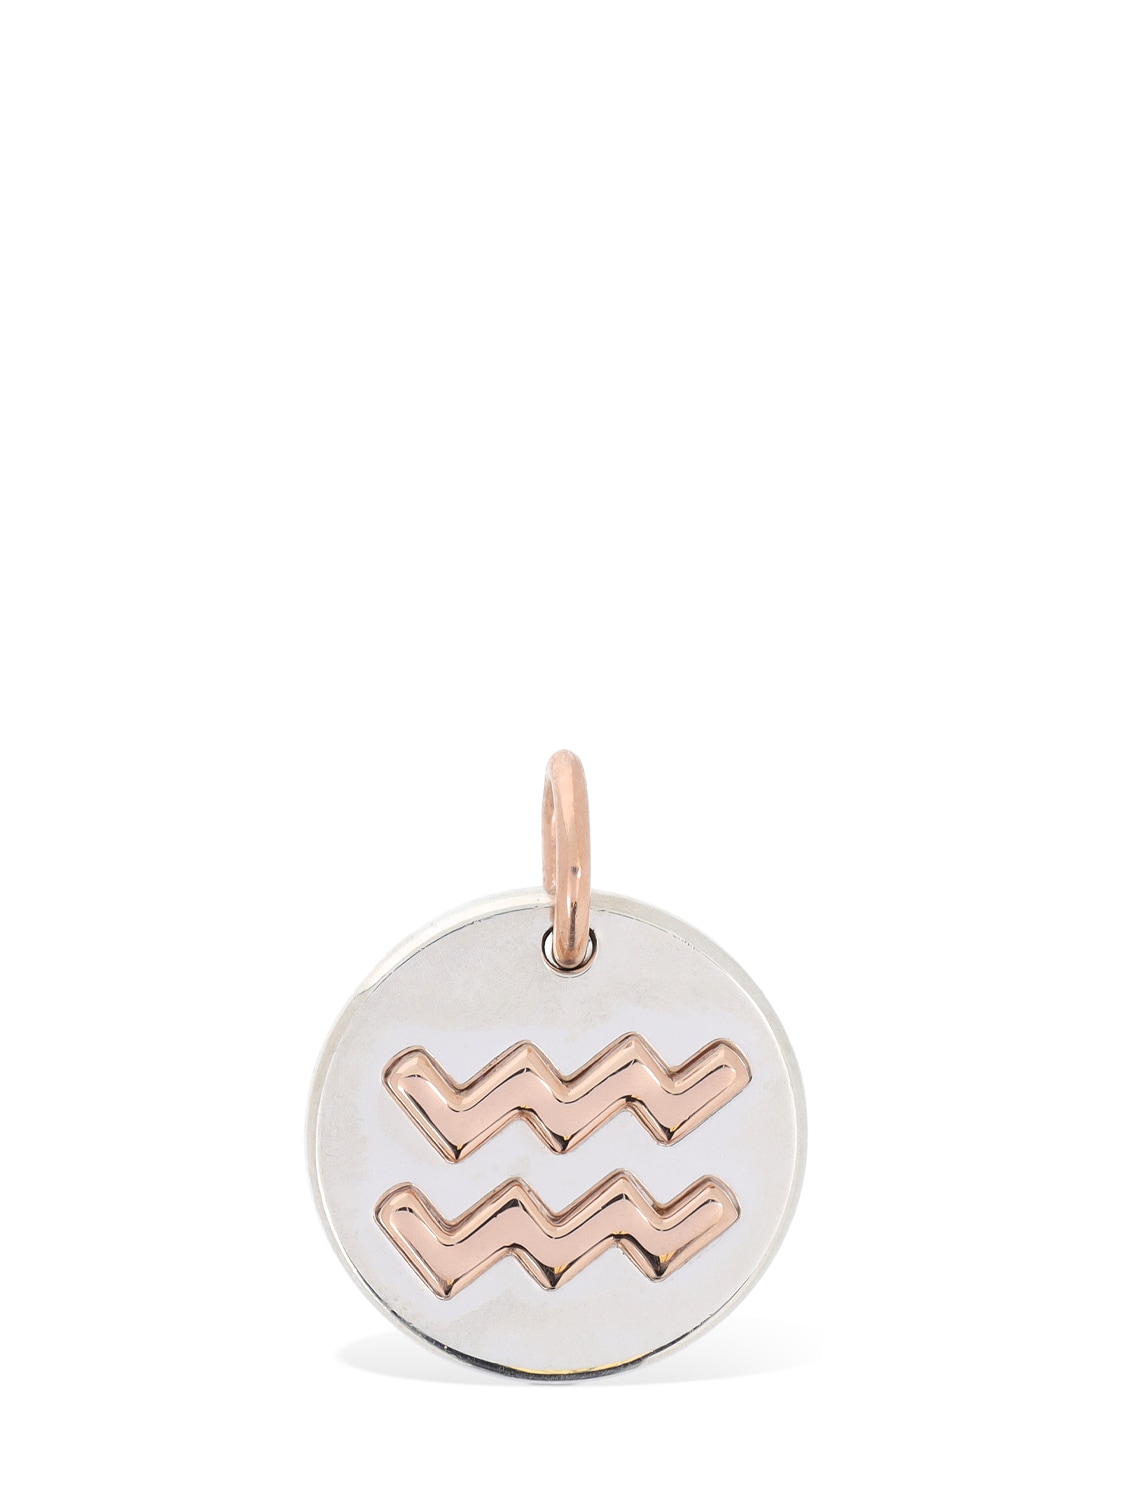 Image of 9kt Rose Gold & Silver Aquarius Charm